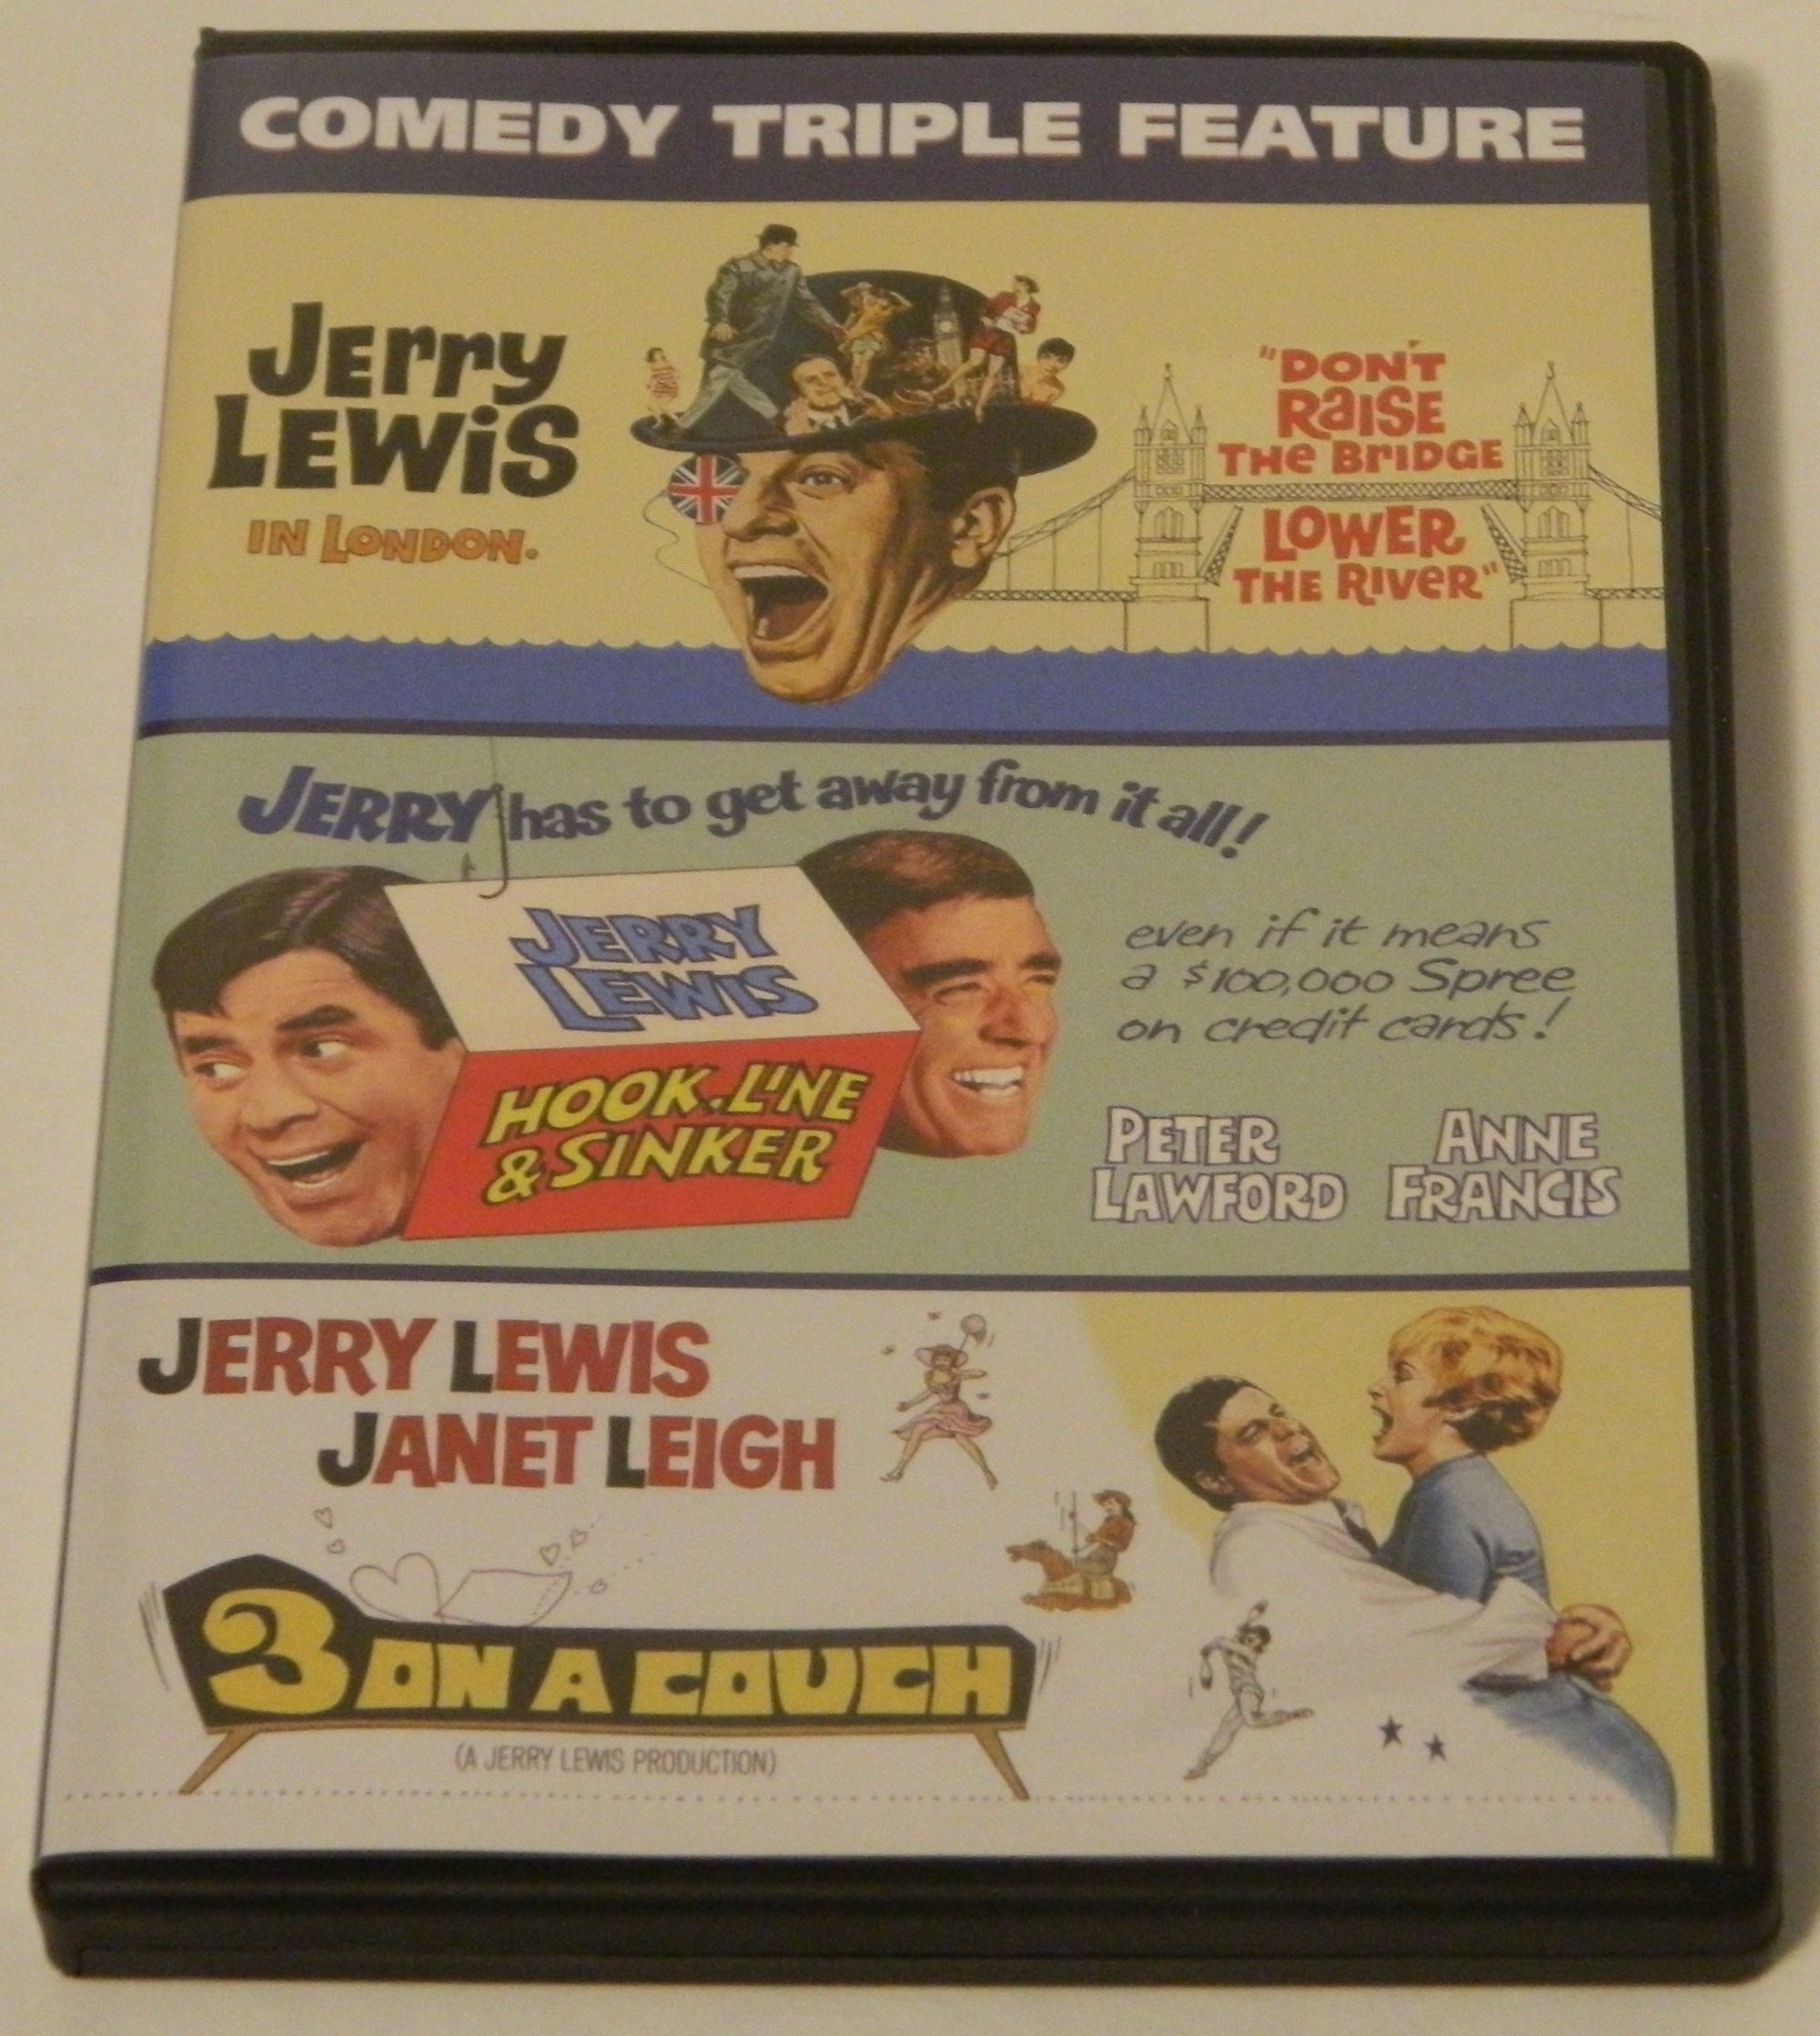 Jerry Lewis Comedy Triple Feature DVD Review